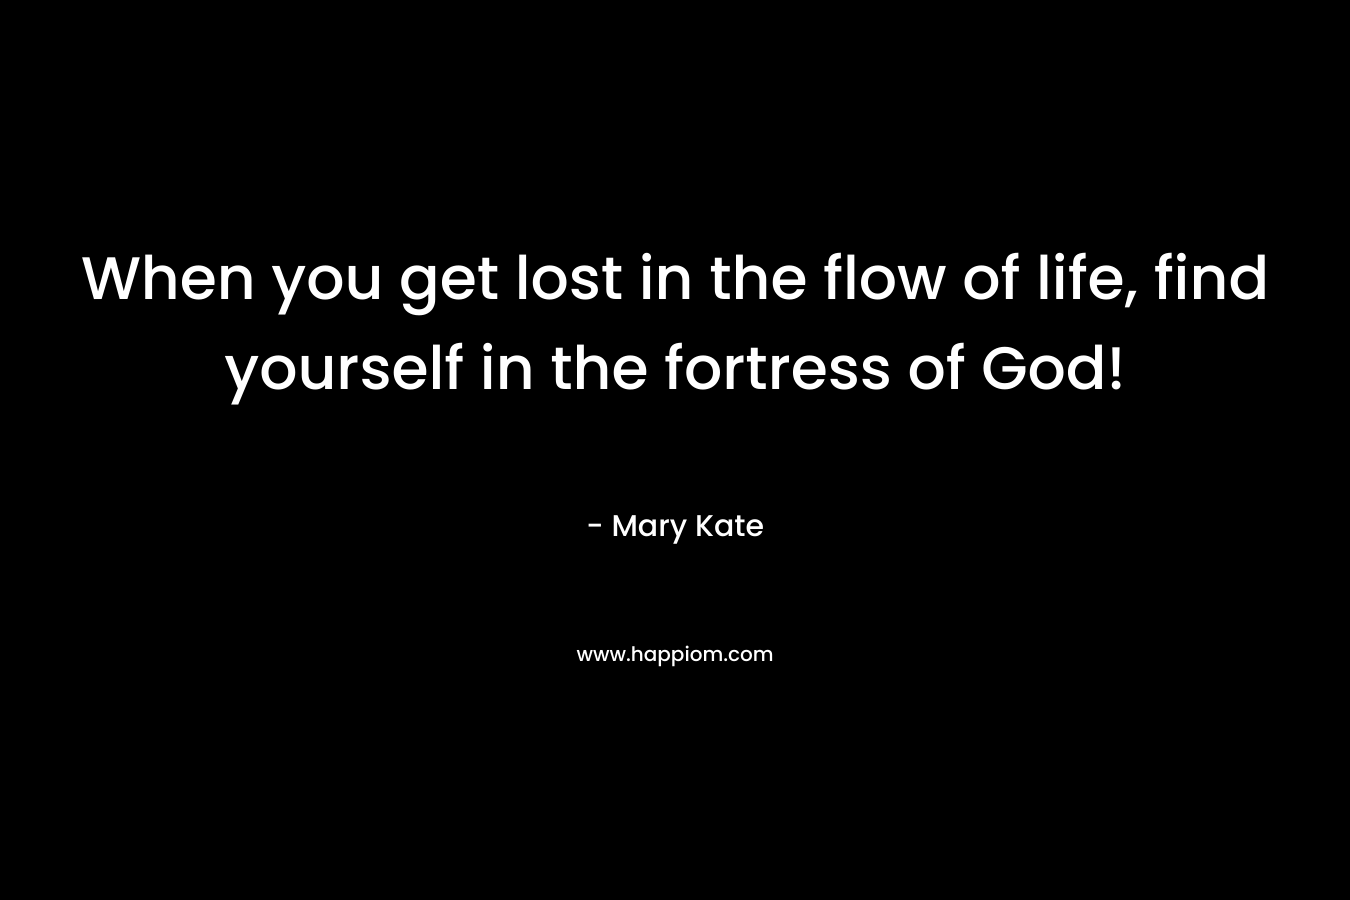 When you get lost in the flow of life, find yourself in the fortress of God!